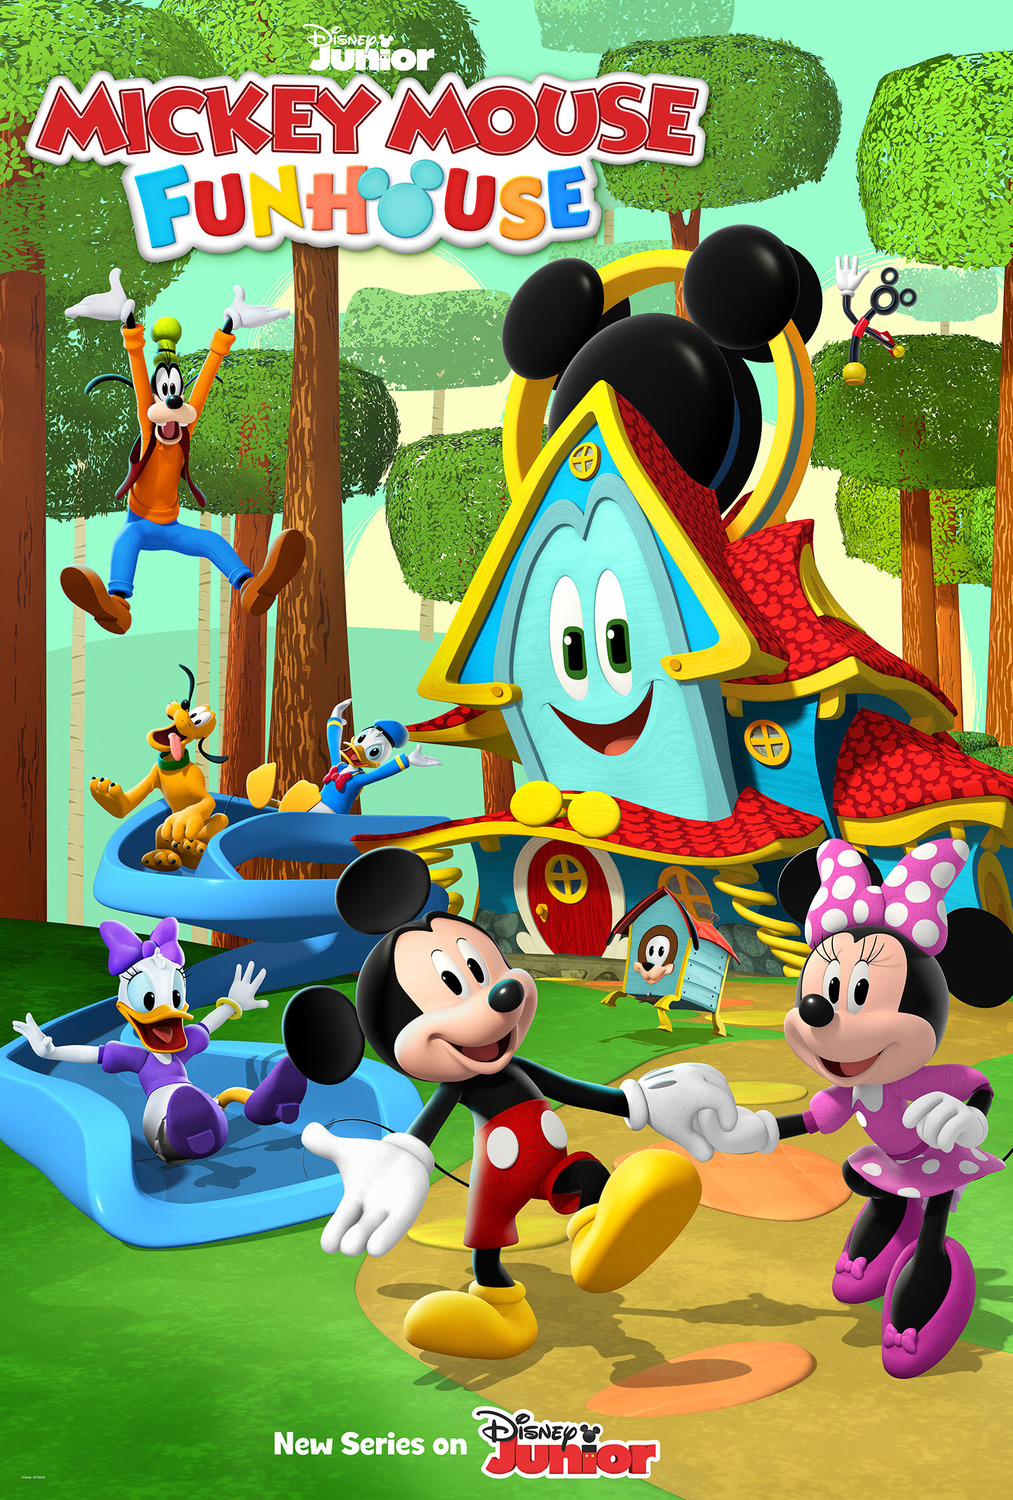 Extra Large TV Poster Image for Mickey Mouse Funhouse 